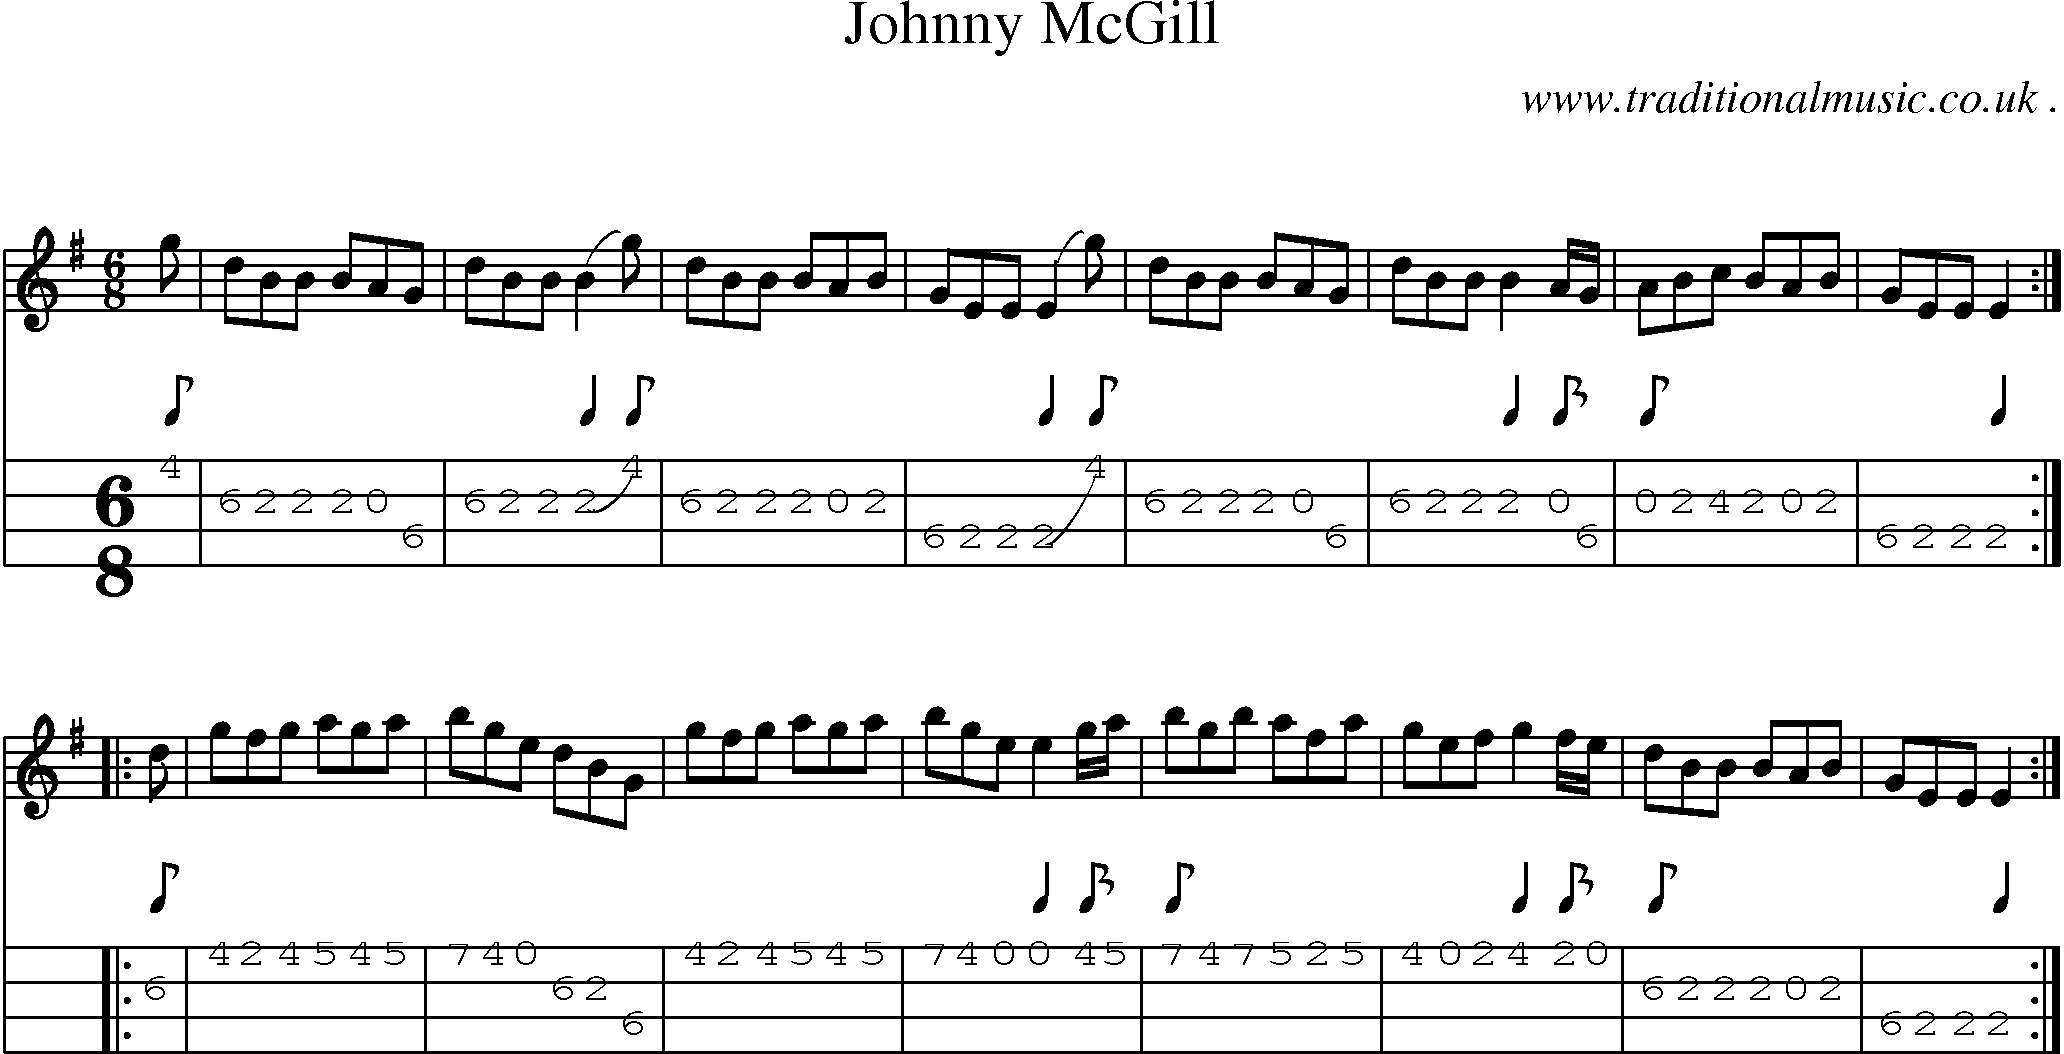 Sheet-music  score, Chords and Mandolin Tabs for Johnny Mcgill